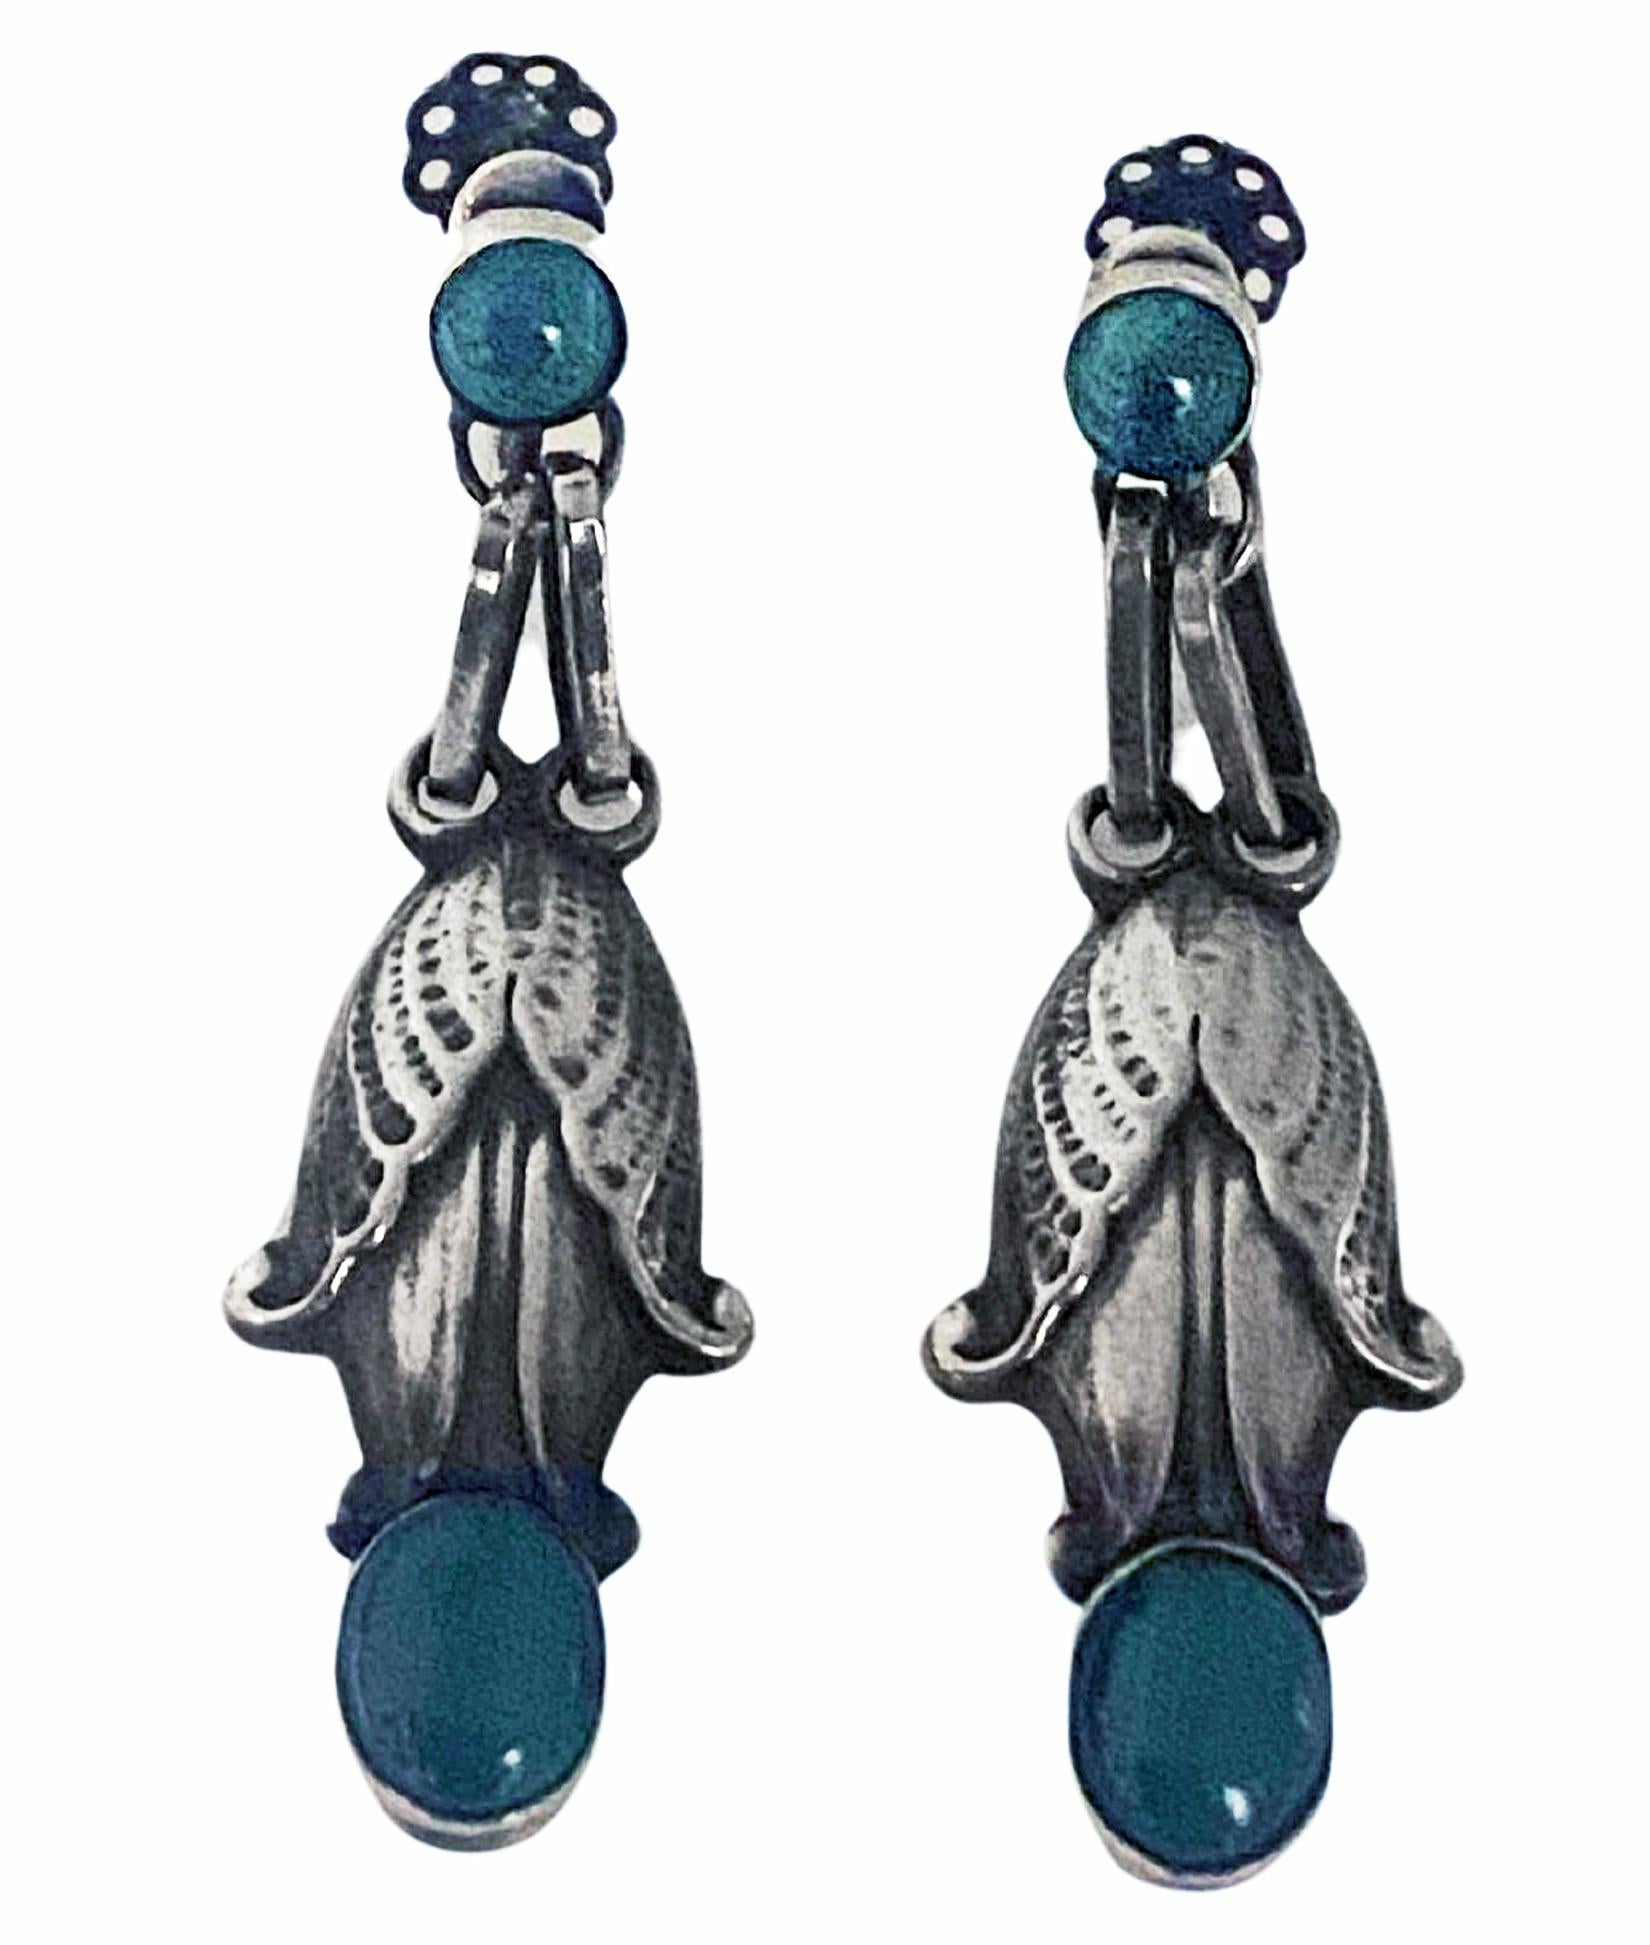 Rare Antique George Jensen Sterling Malachite drop Earrings No 28 C.1935. Wonderful rare design bezel set at top with round cabochon malachite and below with oval cabochon malachite. Original patina, original screw back fitments and full Georg